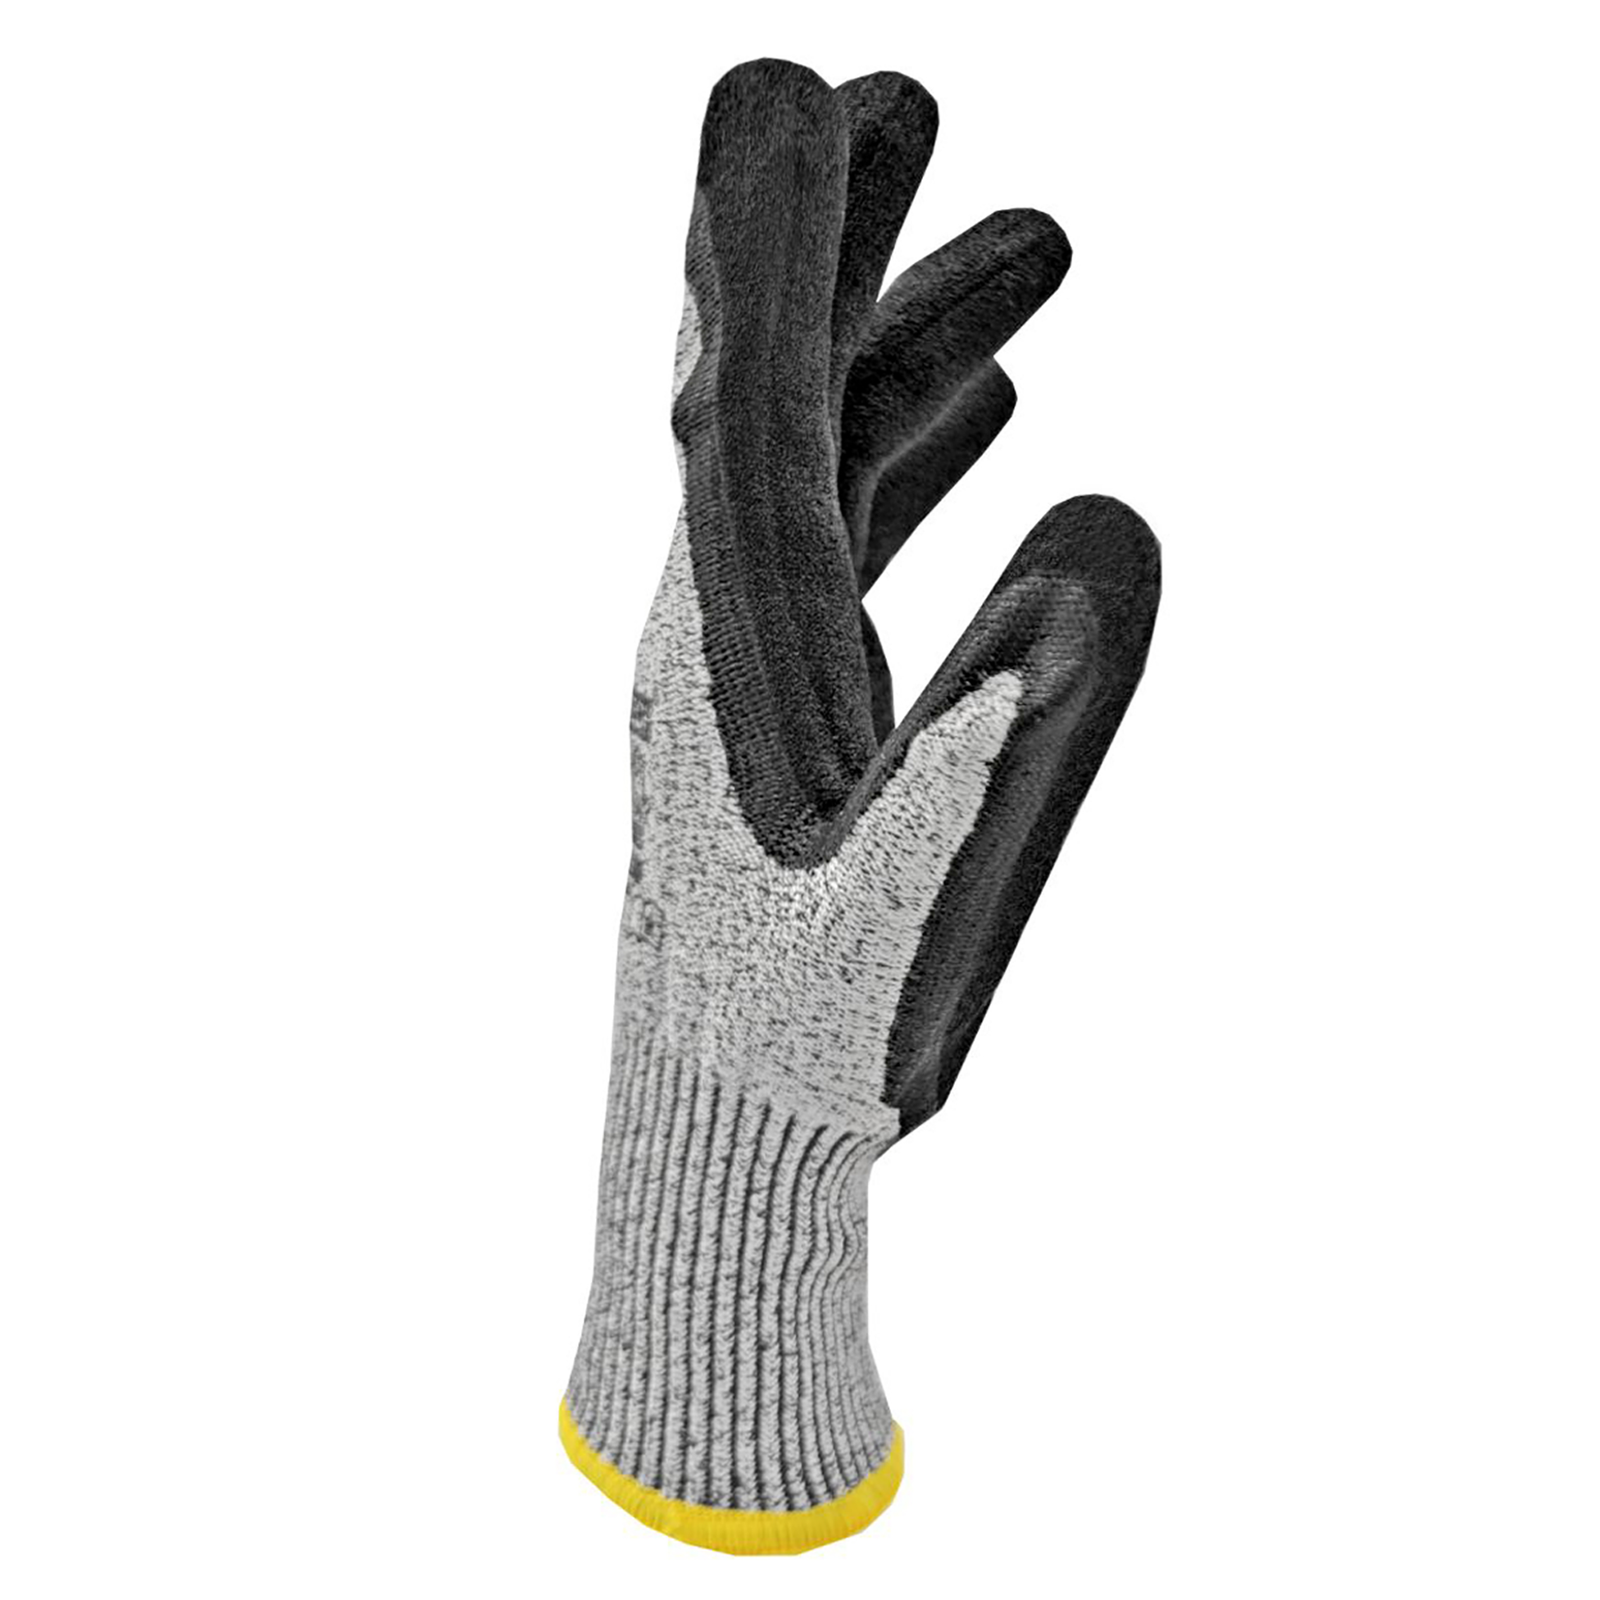 Side of a cut resistant JORESTECH safety work glove with black nitrile dipped palm